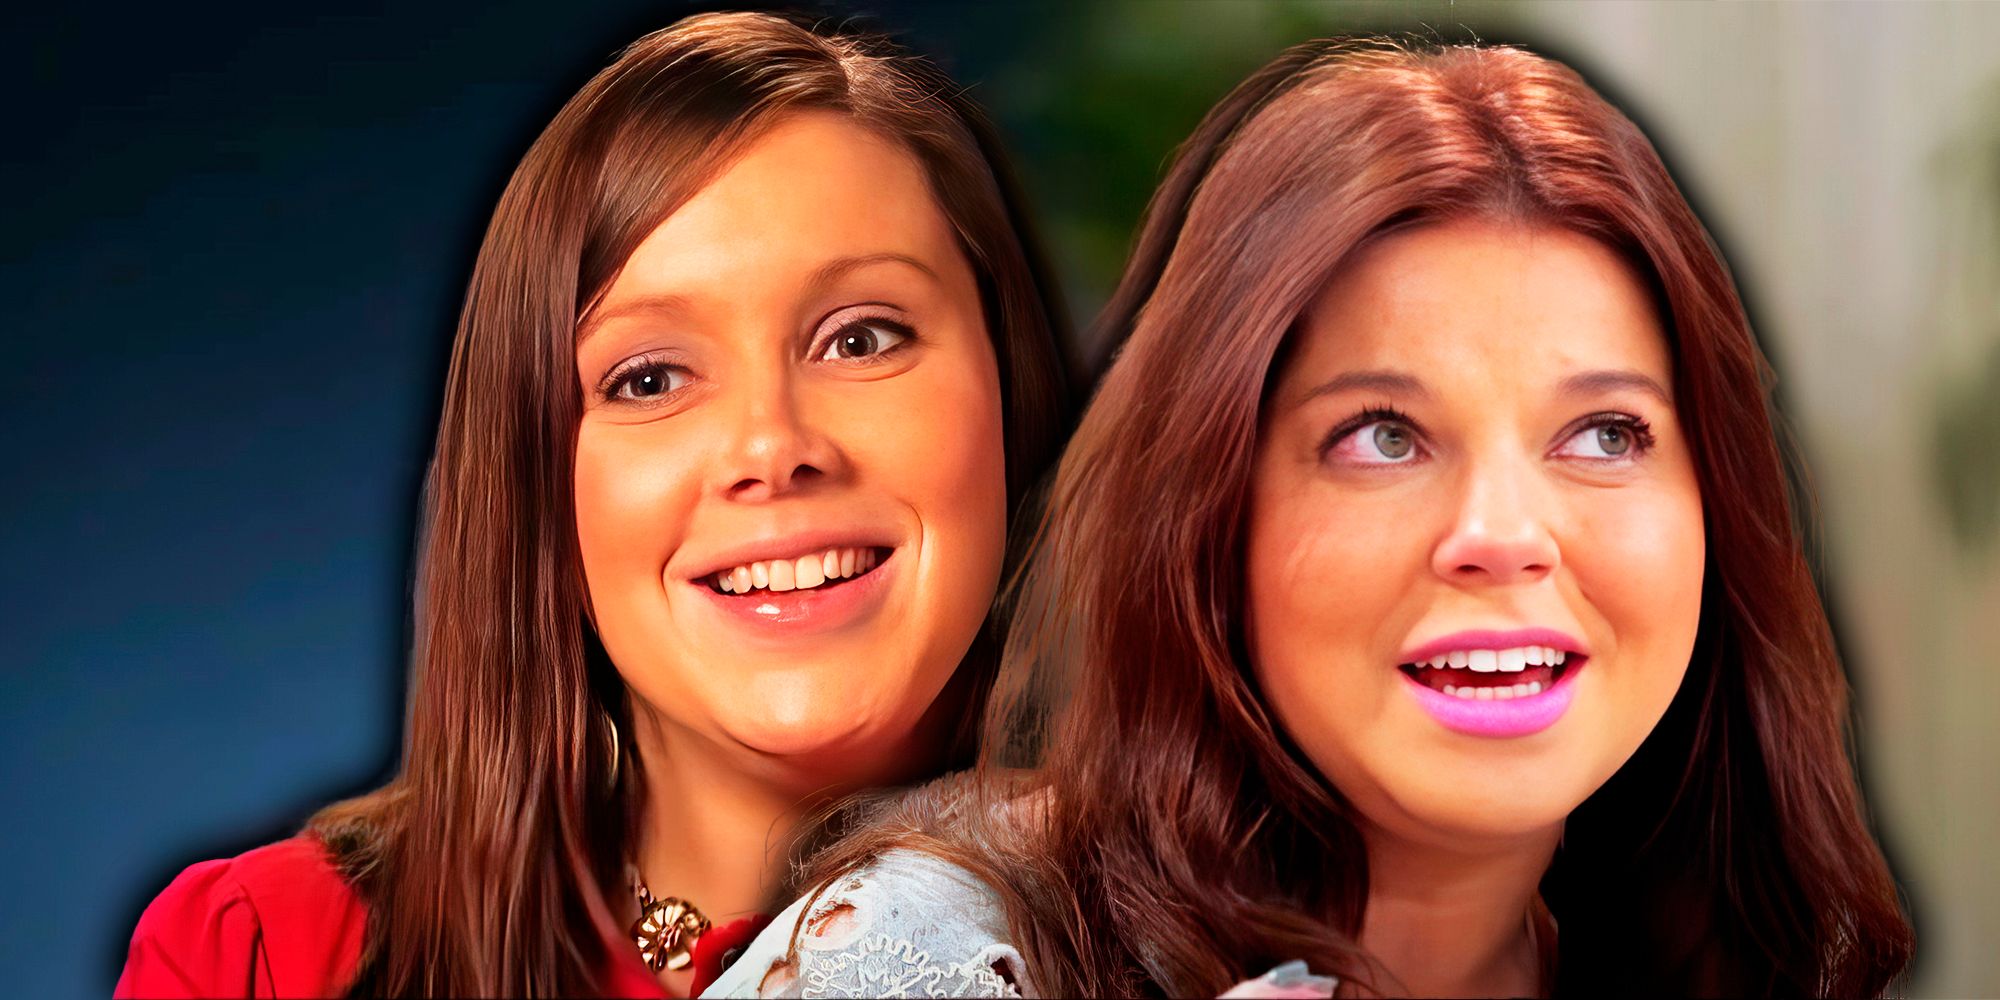 19 Kids and Counting's Amy and Anna Duggar smiling